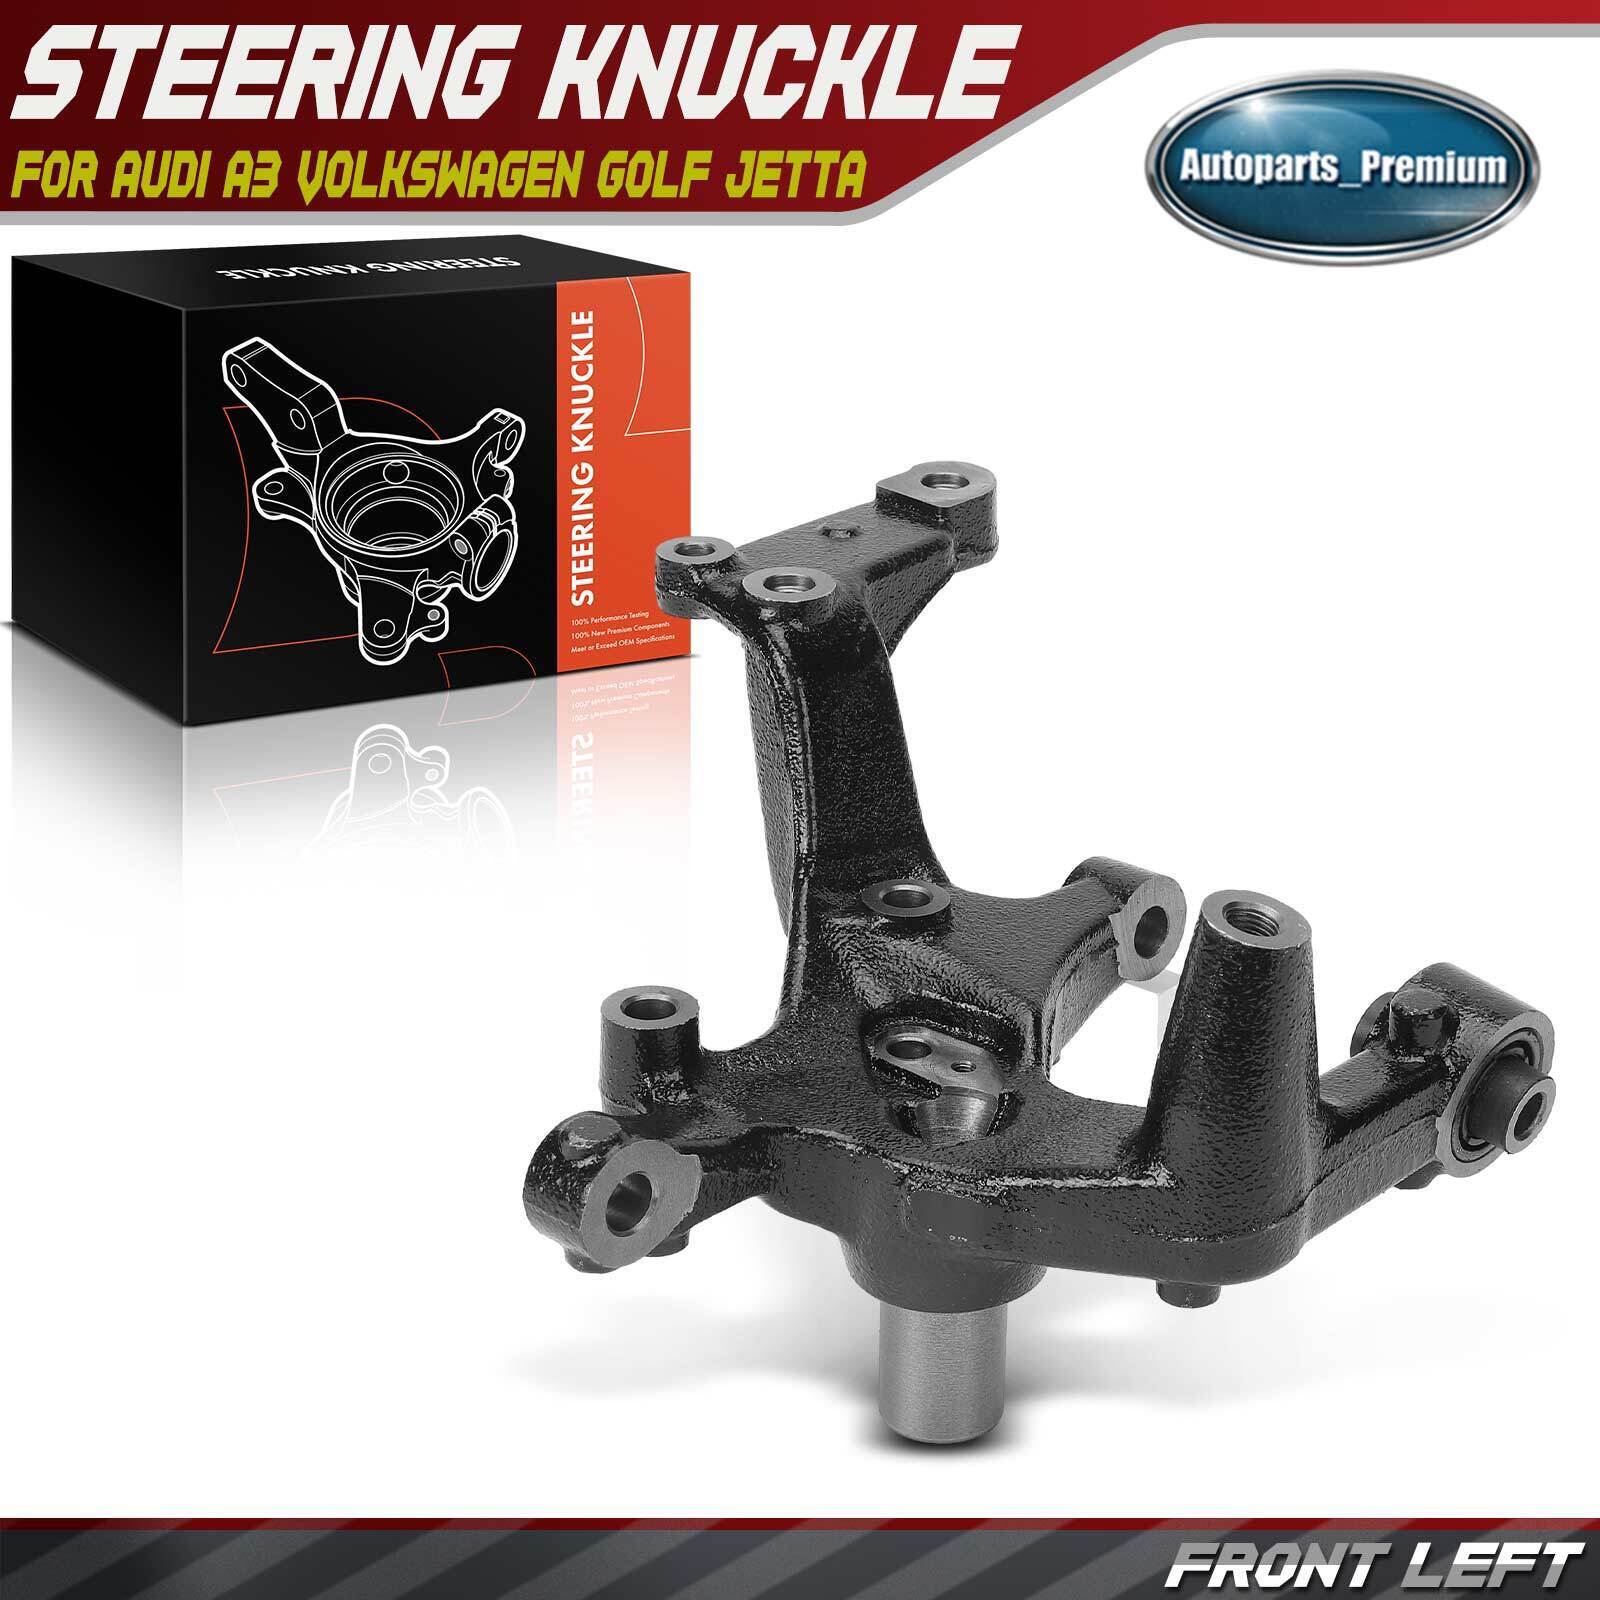 New Steering Knuckle for Audi A3 Volkswagen VW Golf Jetta Rear Left LH Driver